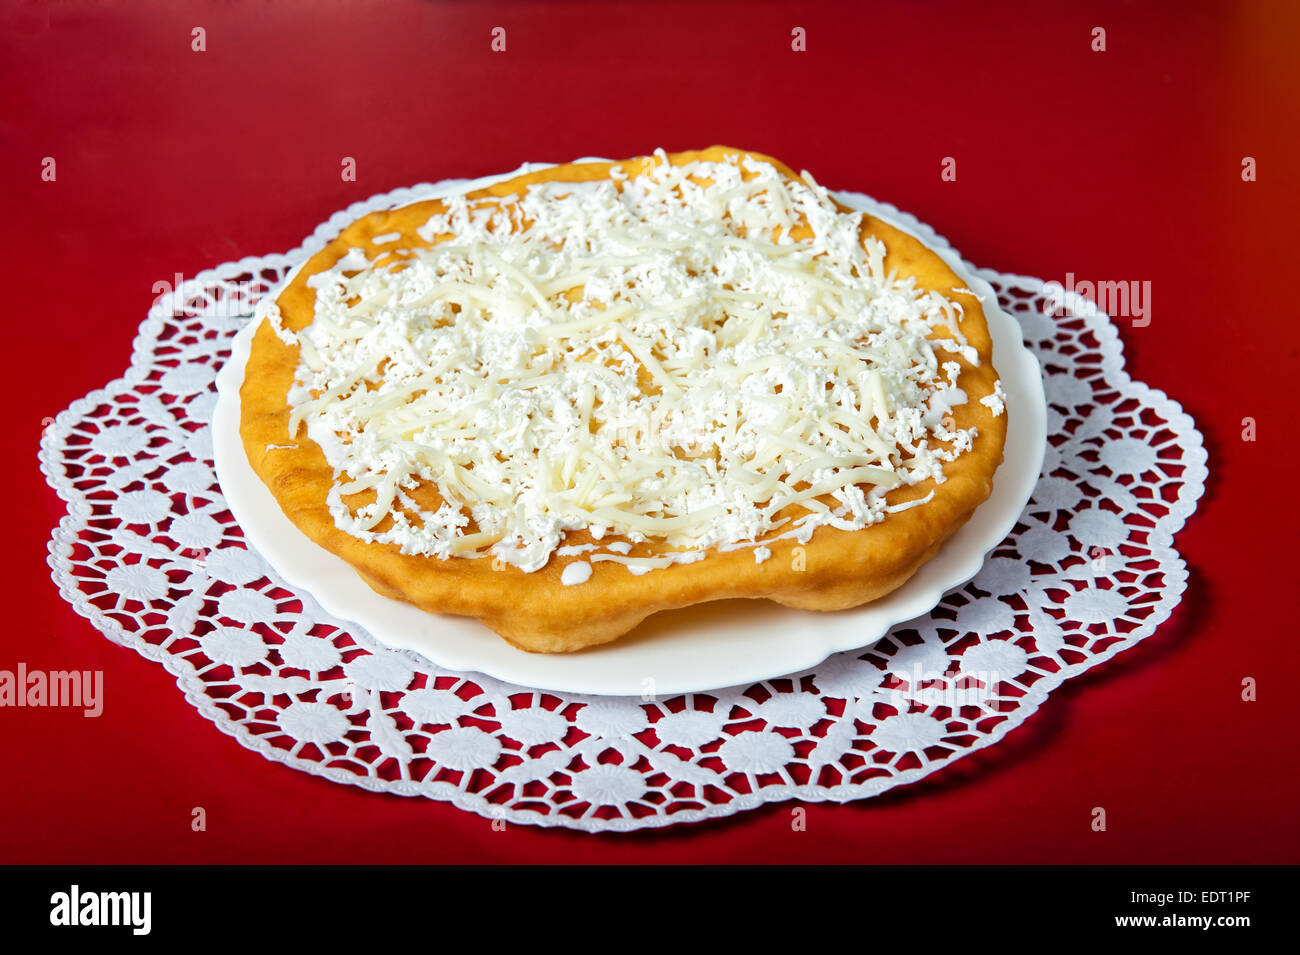 Grilled bun with mozzarella cheese on a red background Stock Photo